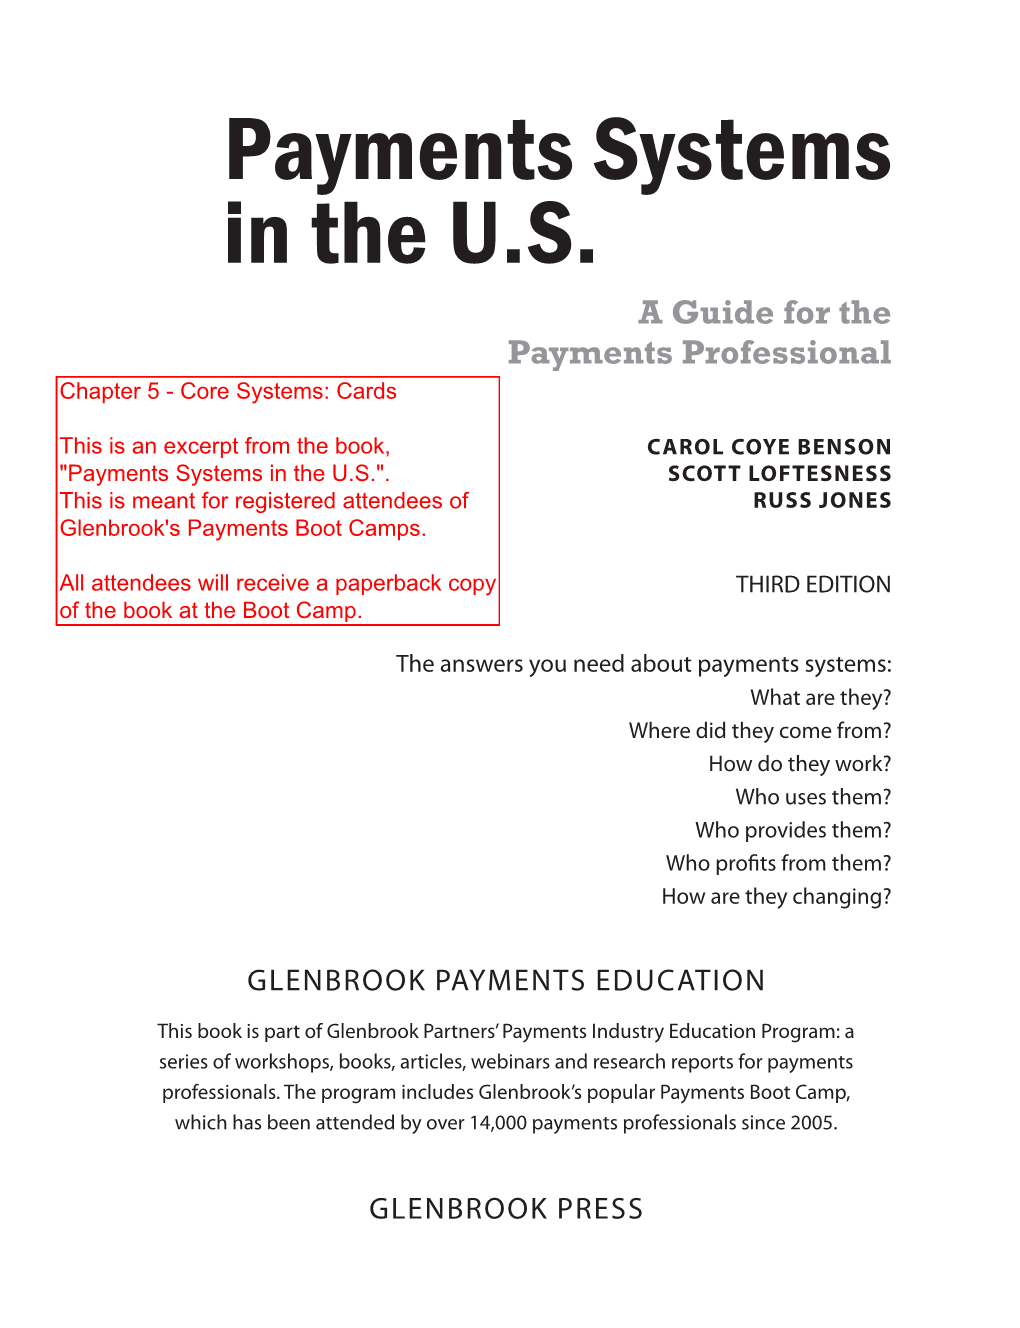 Payments Systems in the U.S. a Guide for the Payments Professional